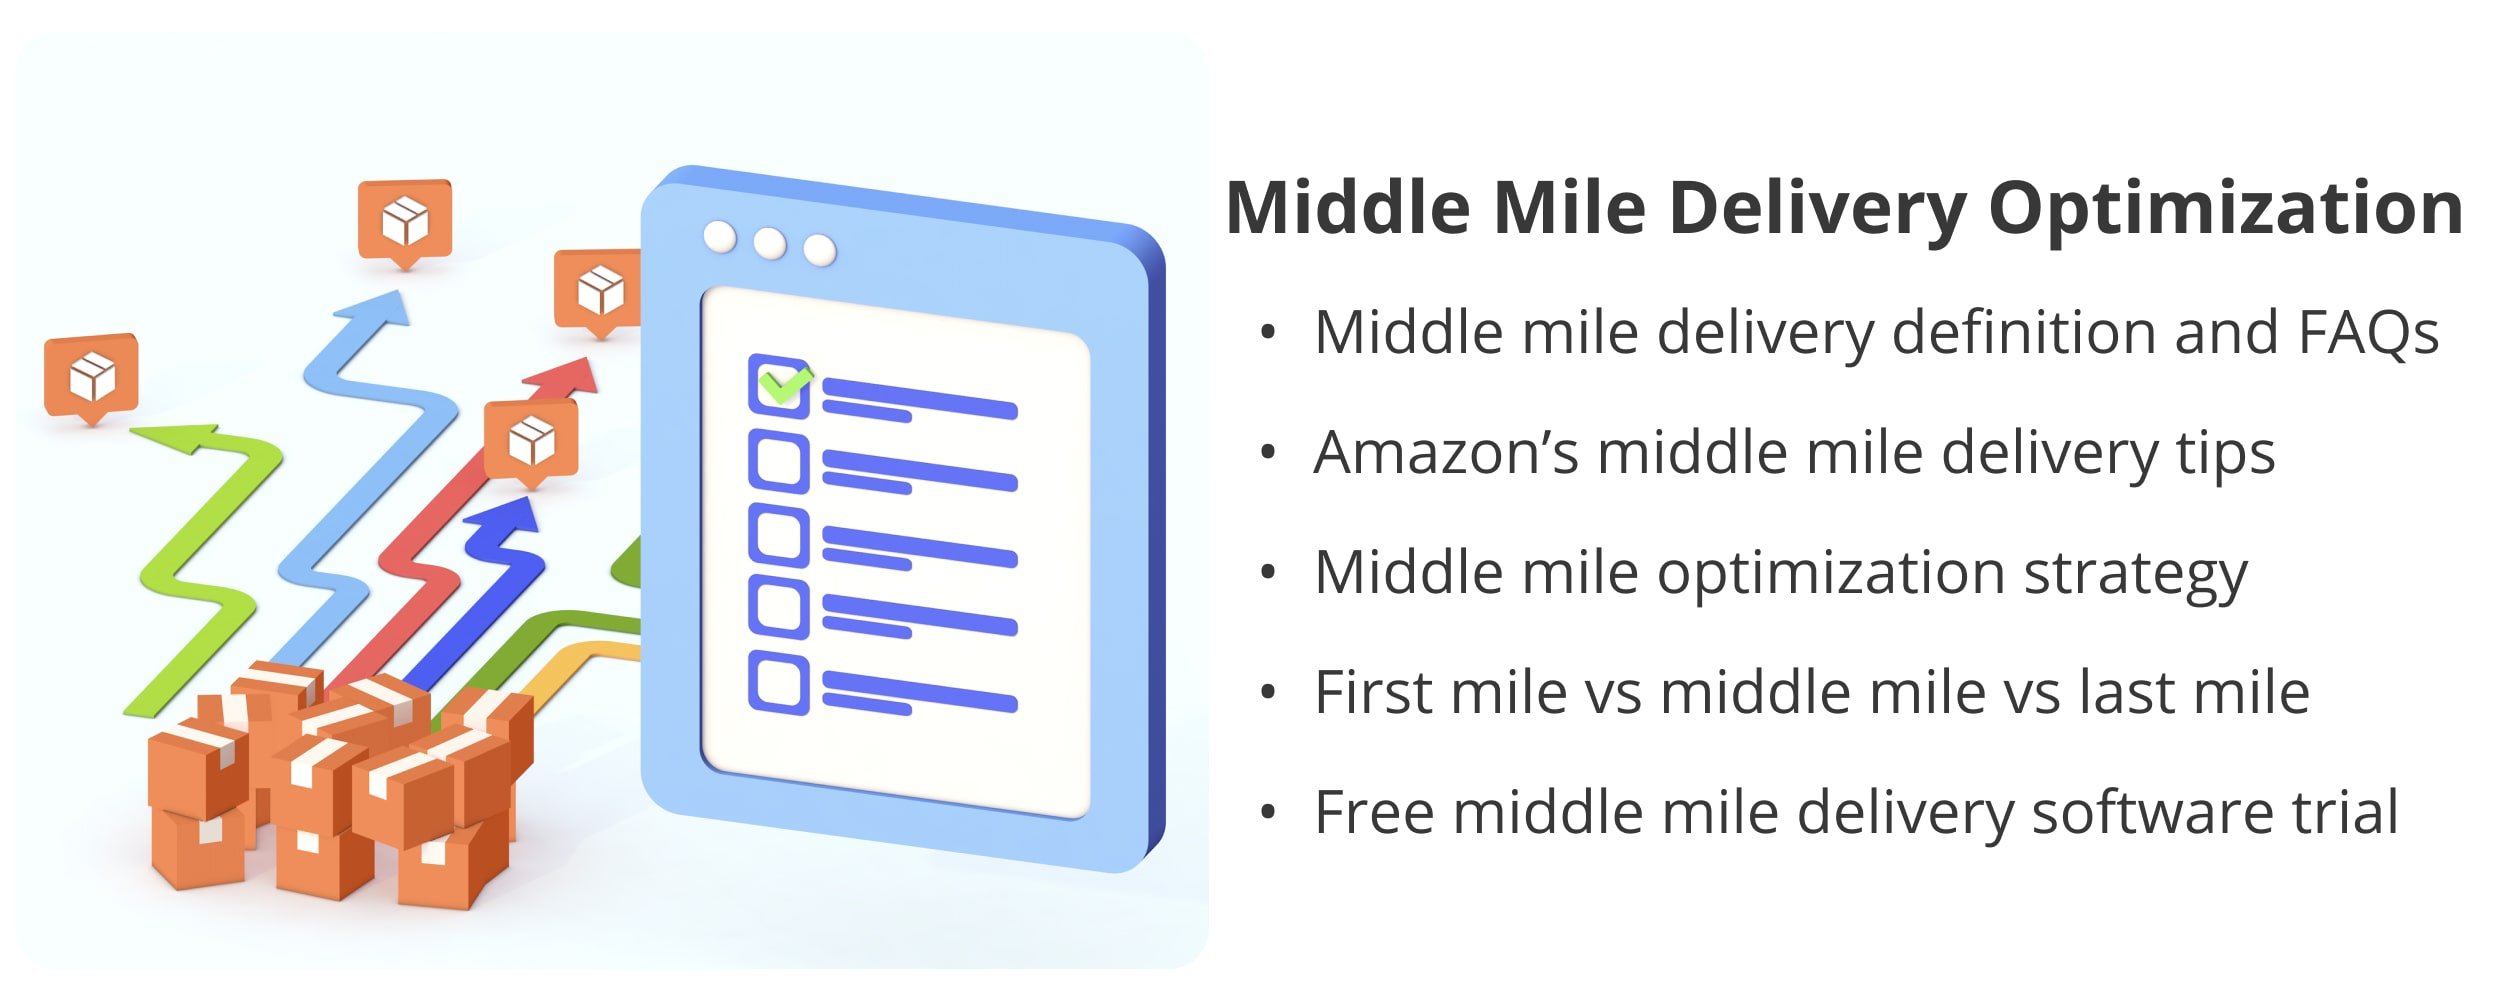 Middle mile delivery optimization strategies, tips, definitions, and FAQs.